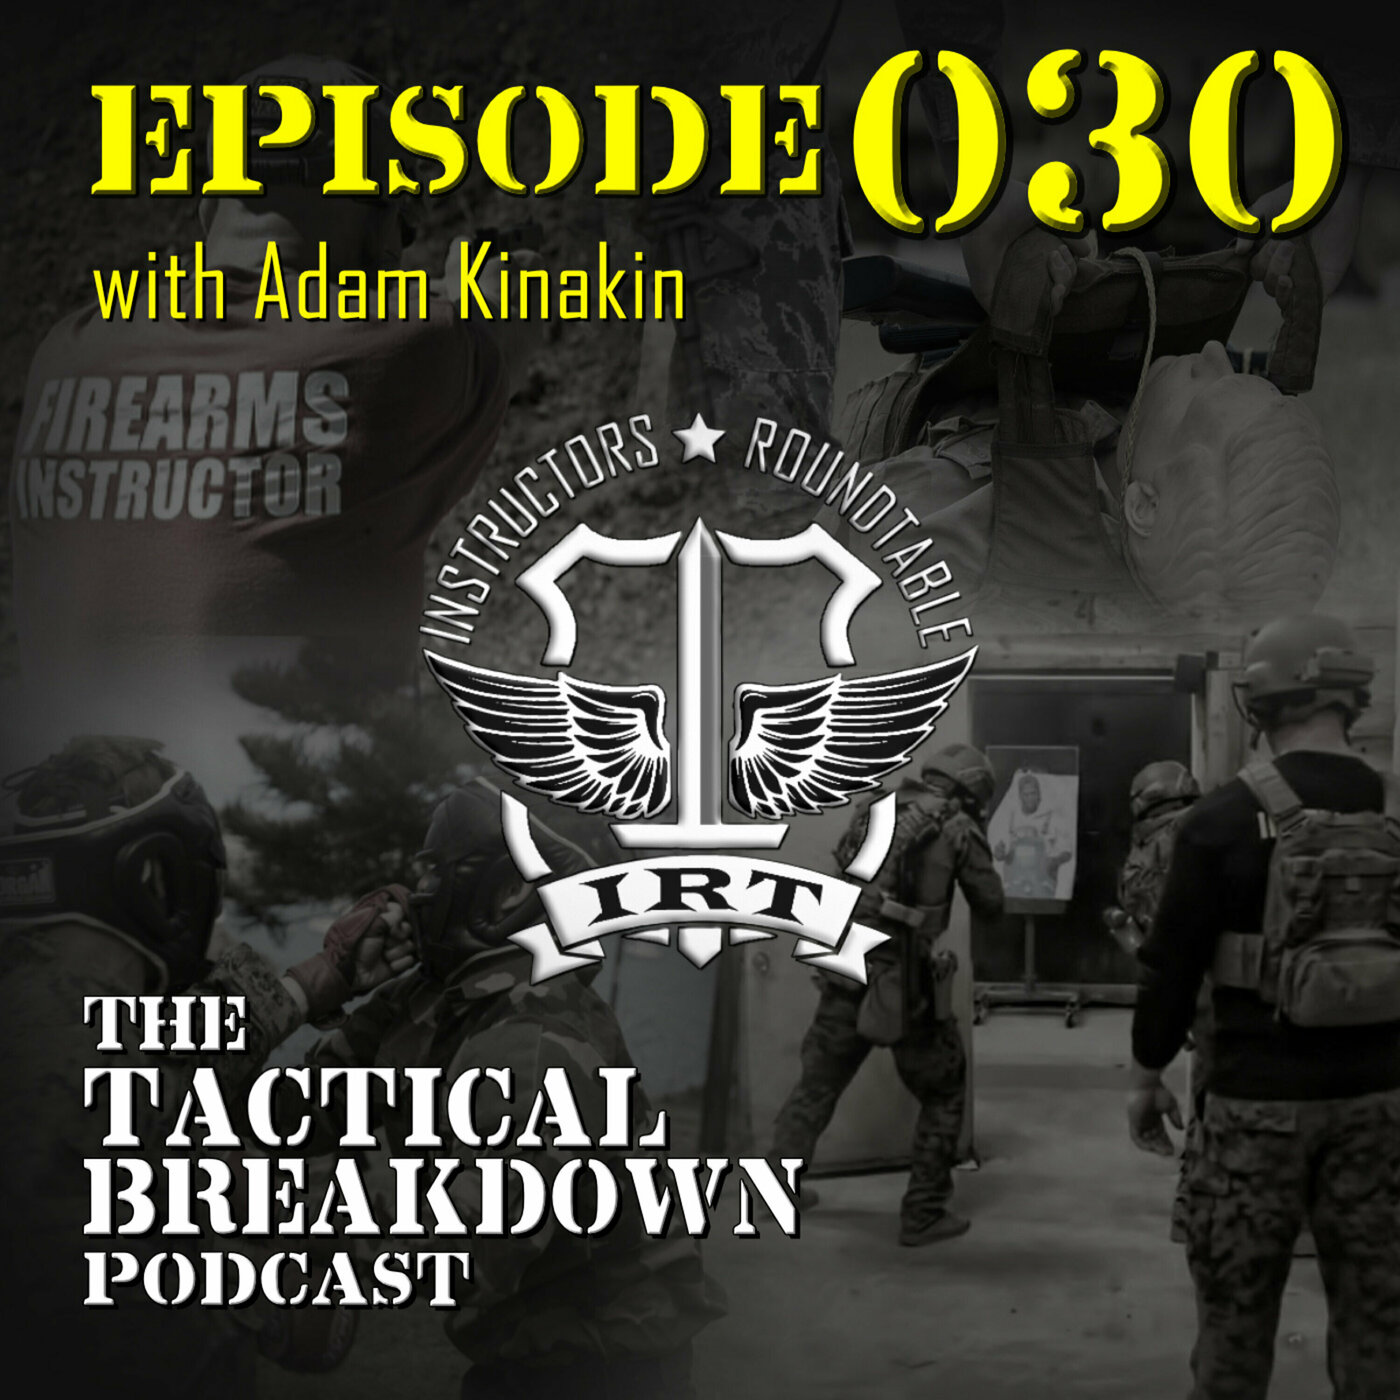 The Instructors' Roundtable (IRT) Explained with Adam Kinakin